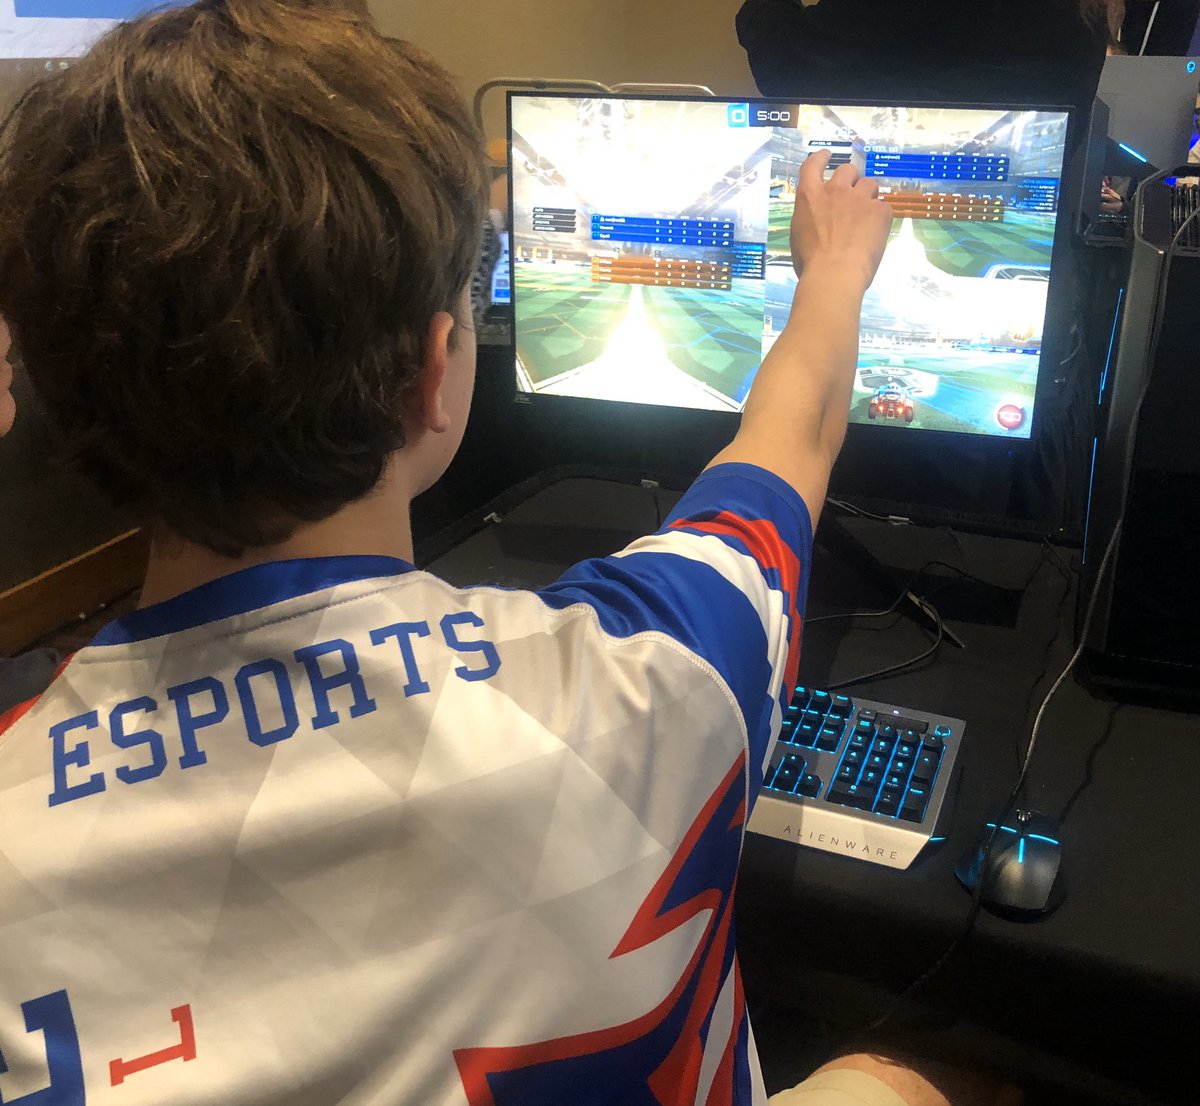 ESports in action! Learning from the State Championship Team from Grapevine-Colleyville ISD. #FRSLN @CTEinCHISD @geraldhudson